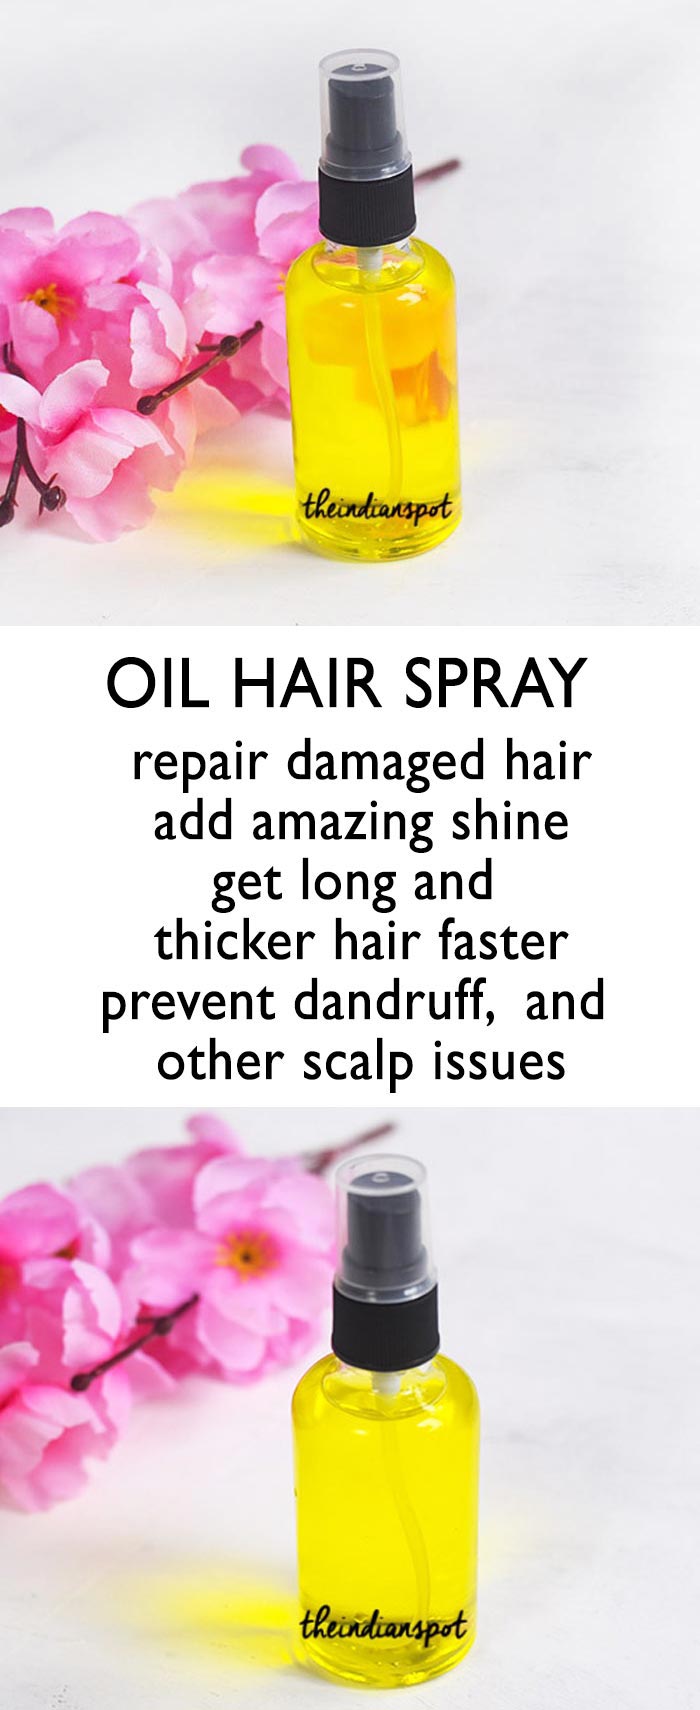 Olive oil Hair Spray - moisturize your hair and give it a lustrous sheen.